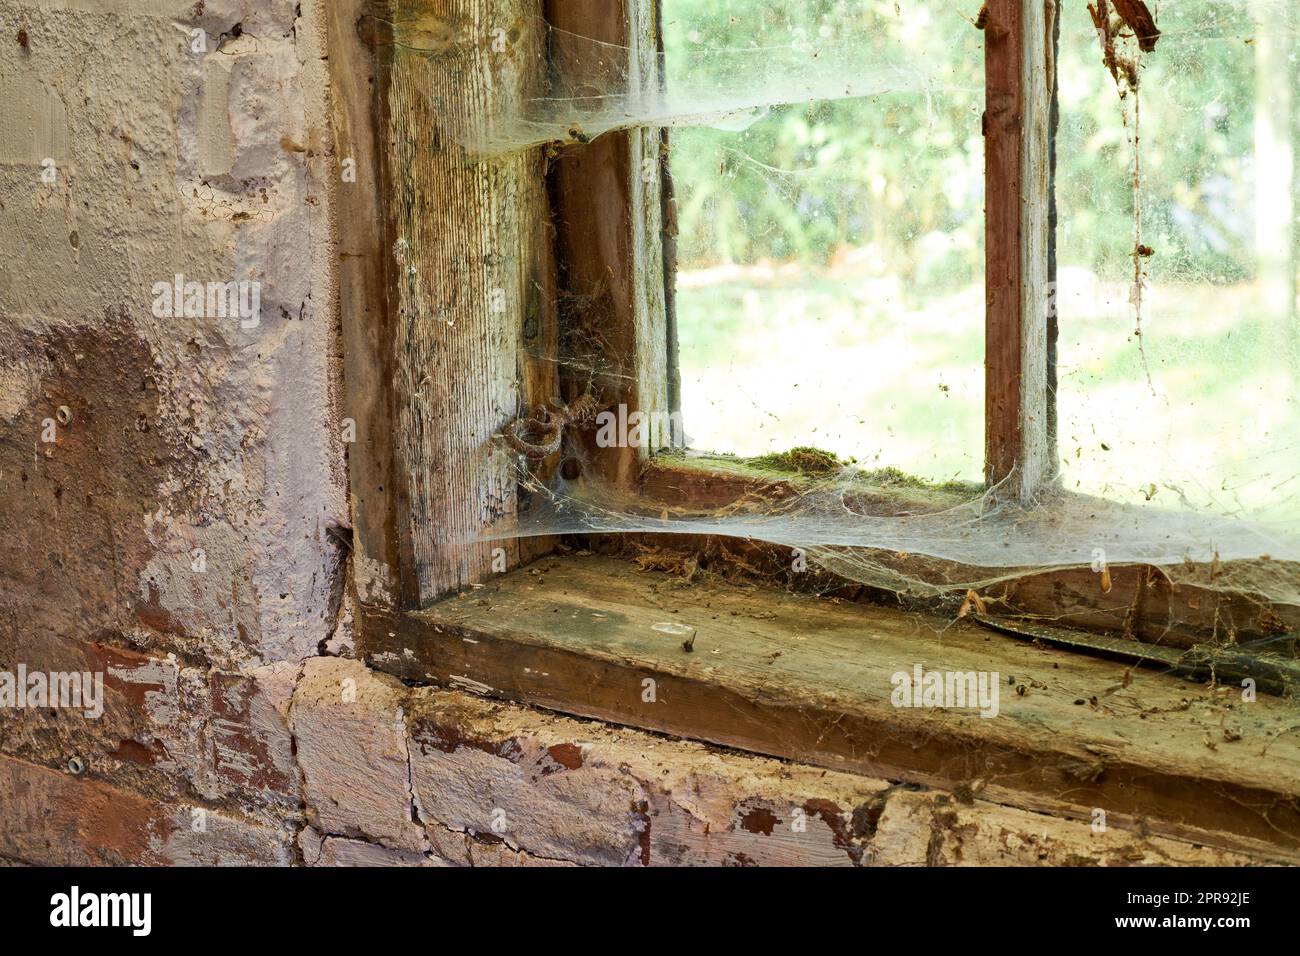 Interior view of an ancient house in need of TLC. An old window with dust and spiderwebs in an abandoned home inside. Architecture details of a windowsill frame with damaged rustic textures. Stock Photo